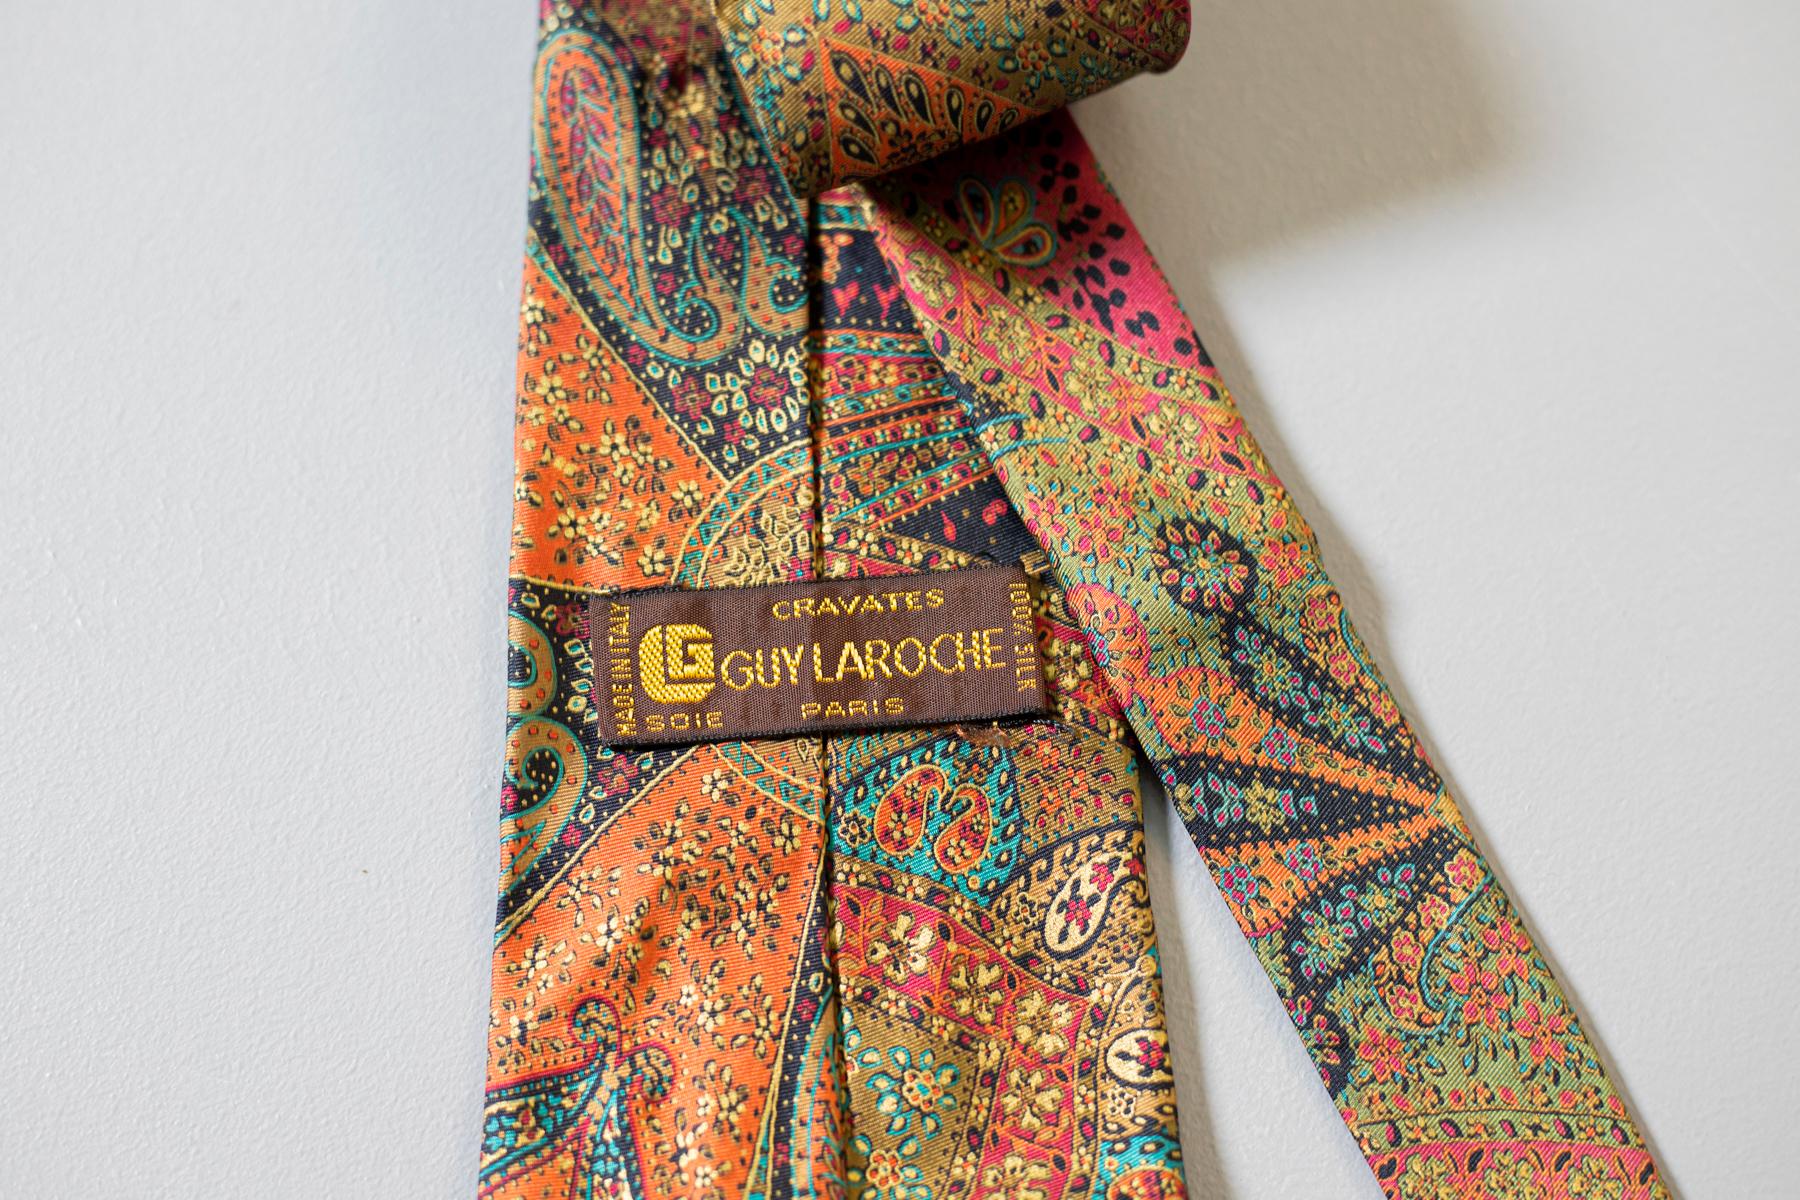 Multicolour, showy and creative: this all-silk tie designed by Guv Laroche and made in Italy is an excellent accessory. Decorated with a paisley motif in orange, red, green, blue and yellow, this tie is perfect for everyone who wants to lighten up a